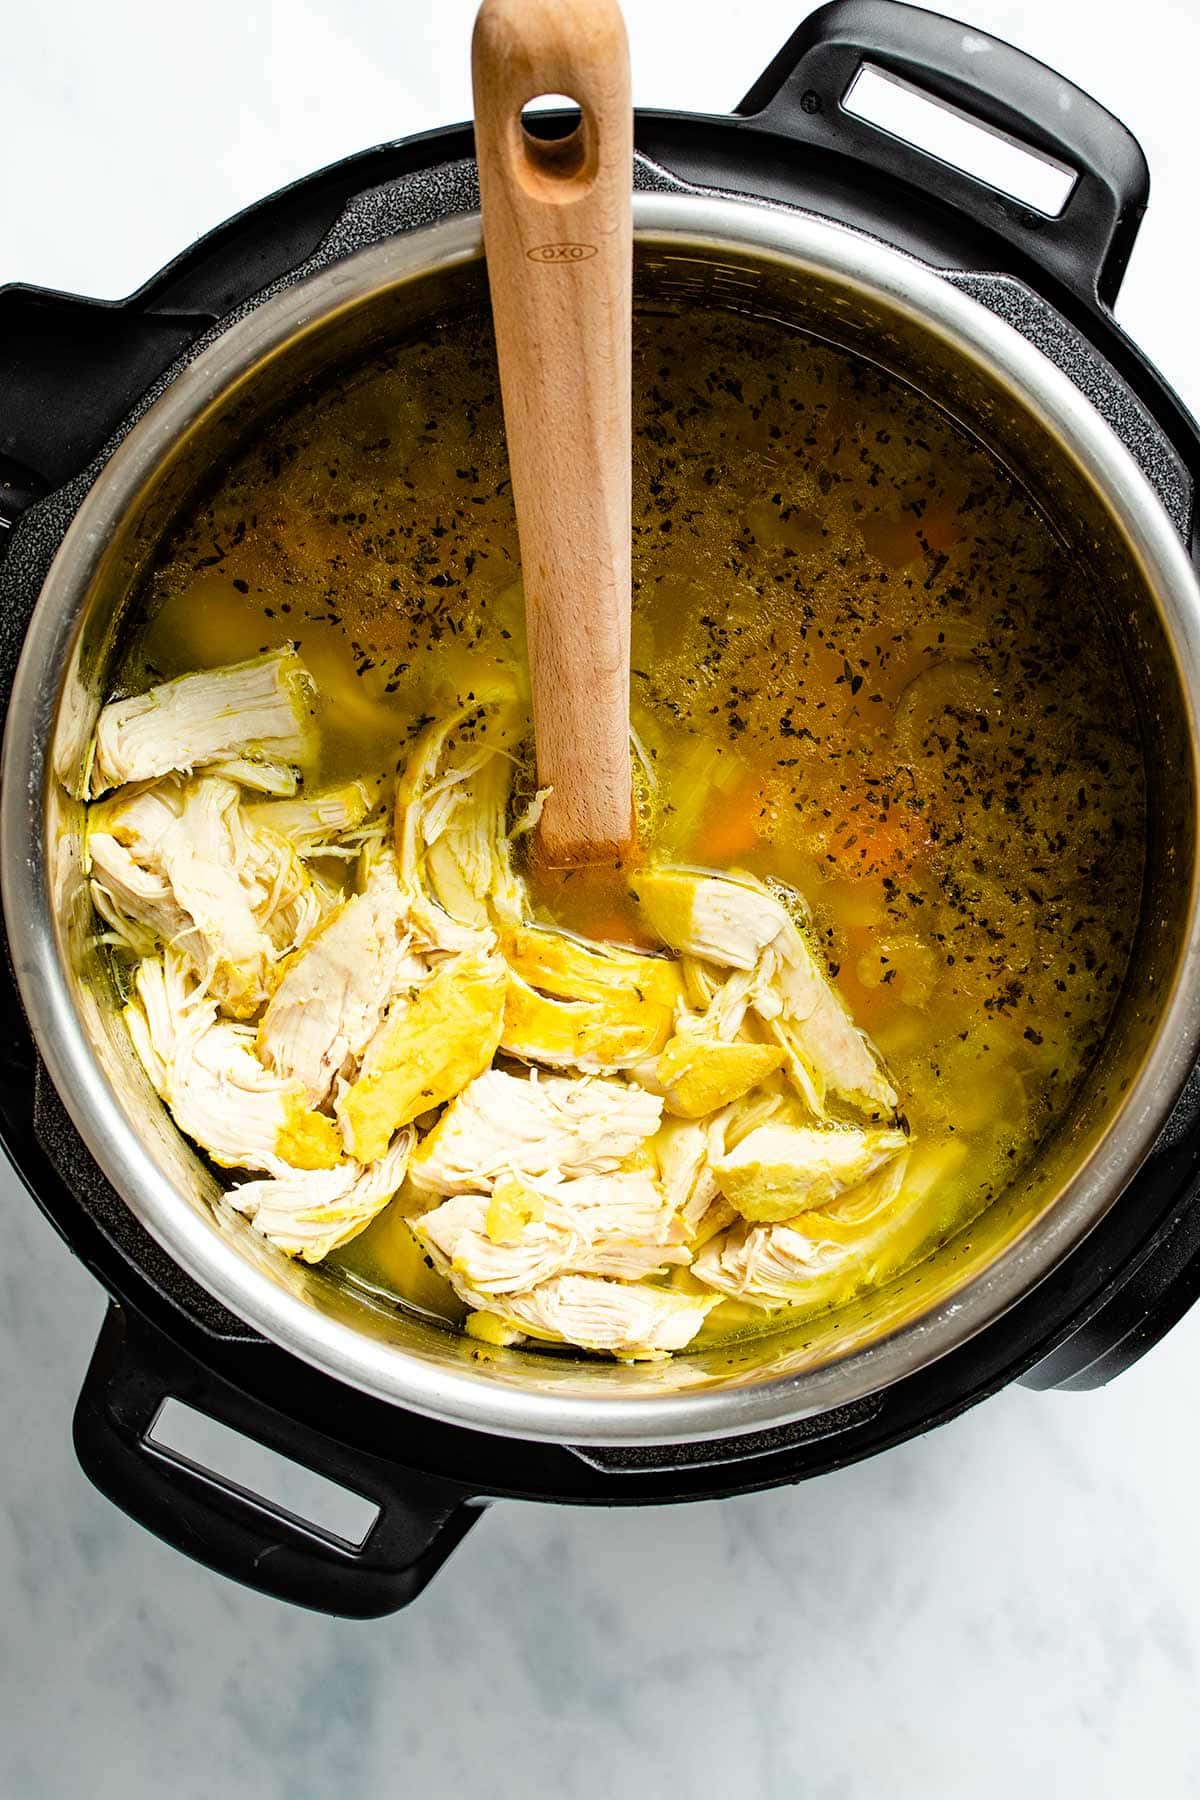 Adding pieces of cooked chicken back to the soup in the Instant Pot.